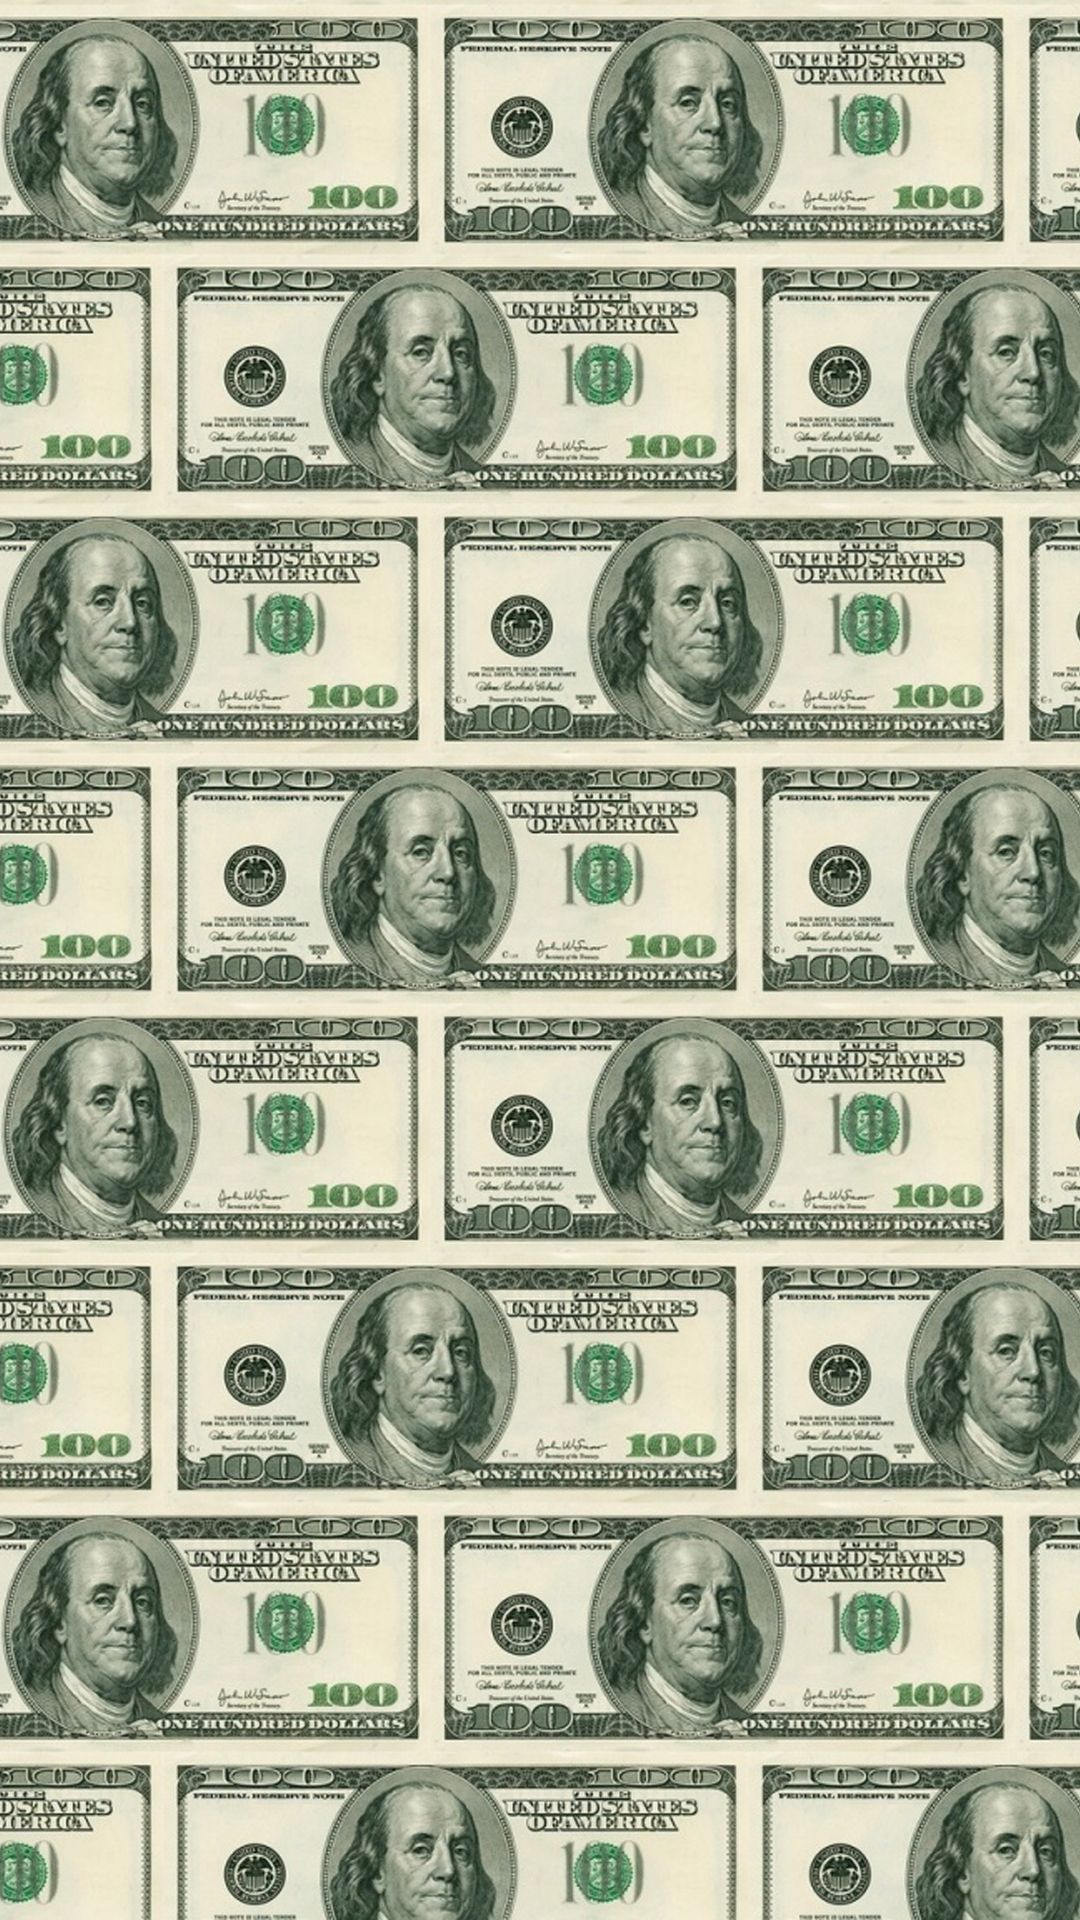 US Dollars IPhone 6 6 Plus And IPhone 5 4 Wallpaper